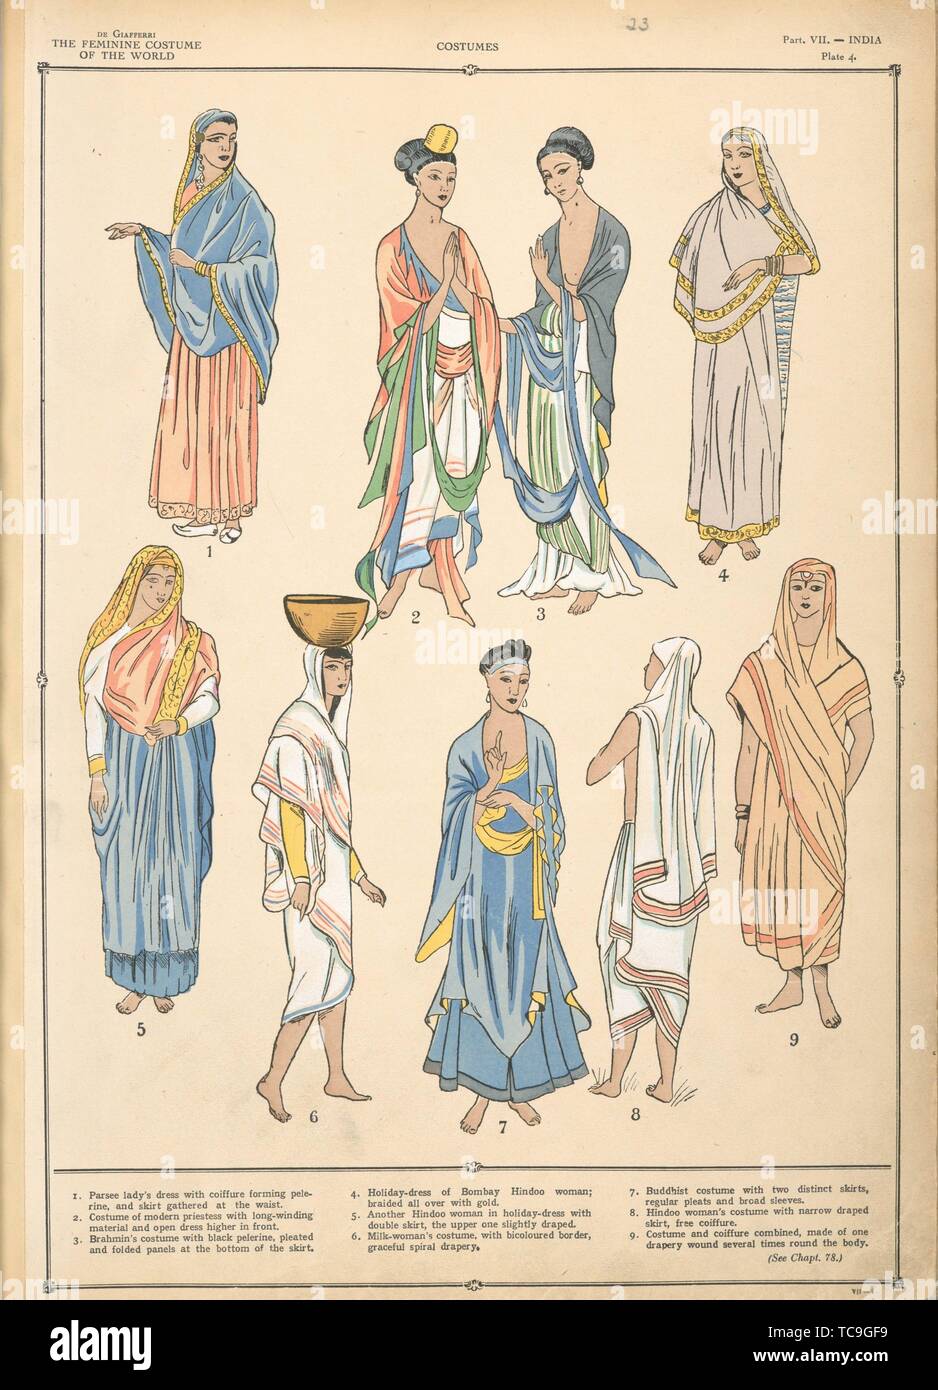 Costumes. Giafferri, Paul Louis de, b. 1886 (Author). The history of the  feminine costume of the world, from the year 5318 B.C. to our century. Date  Stock Photo - Alamy